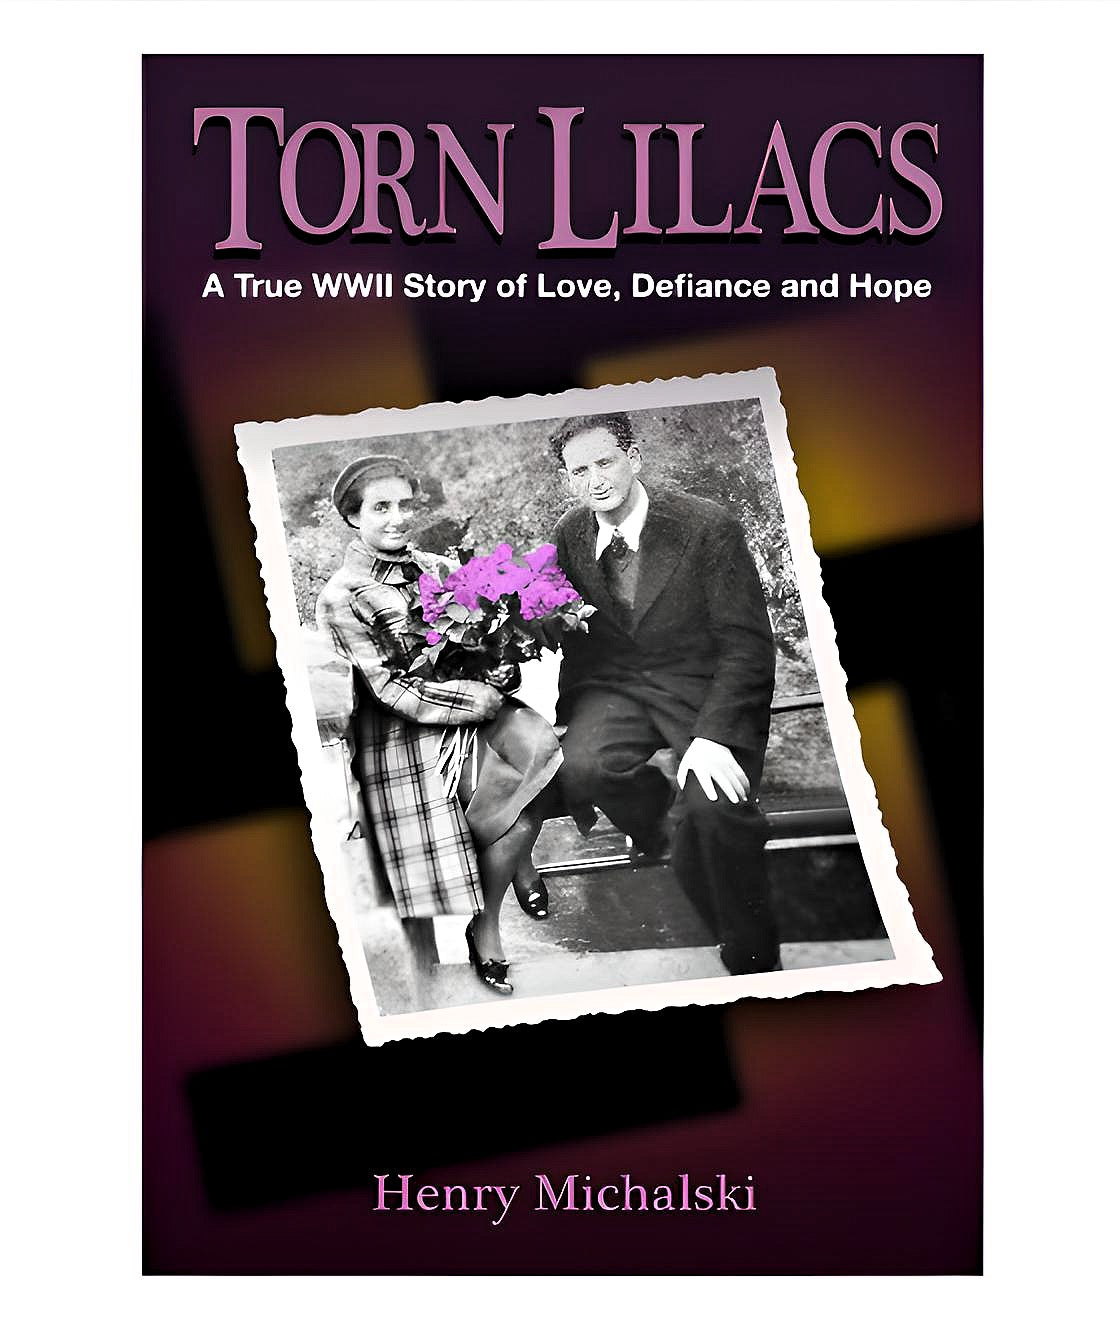 Torn Lilacs: A True WWII Story of Love, Defiance and Hope